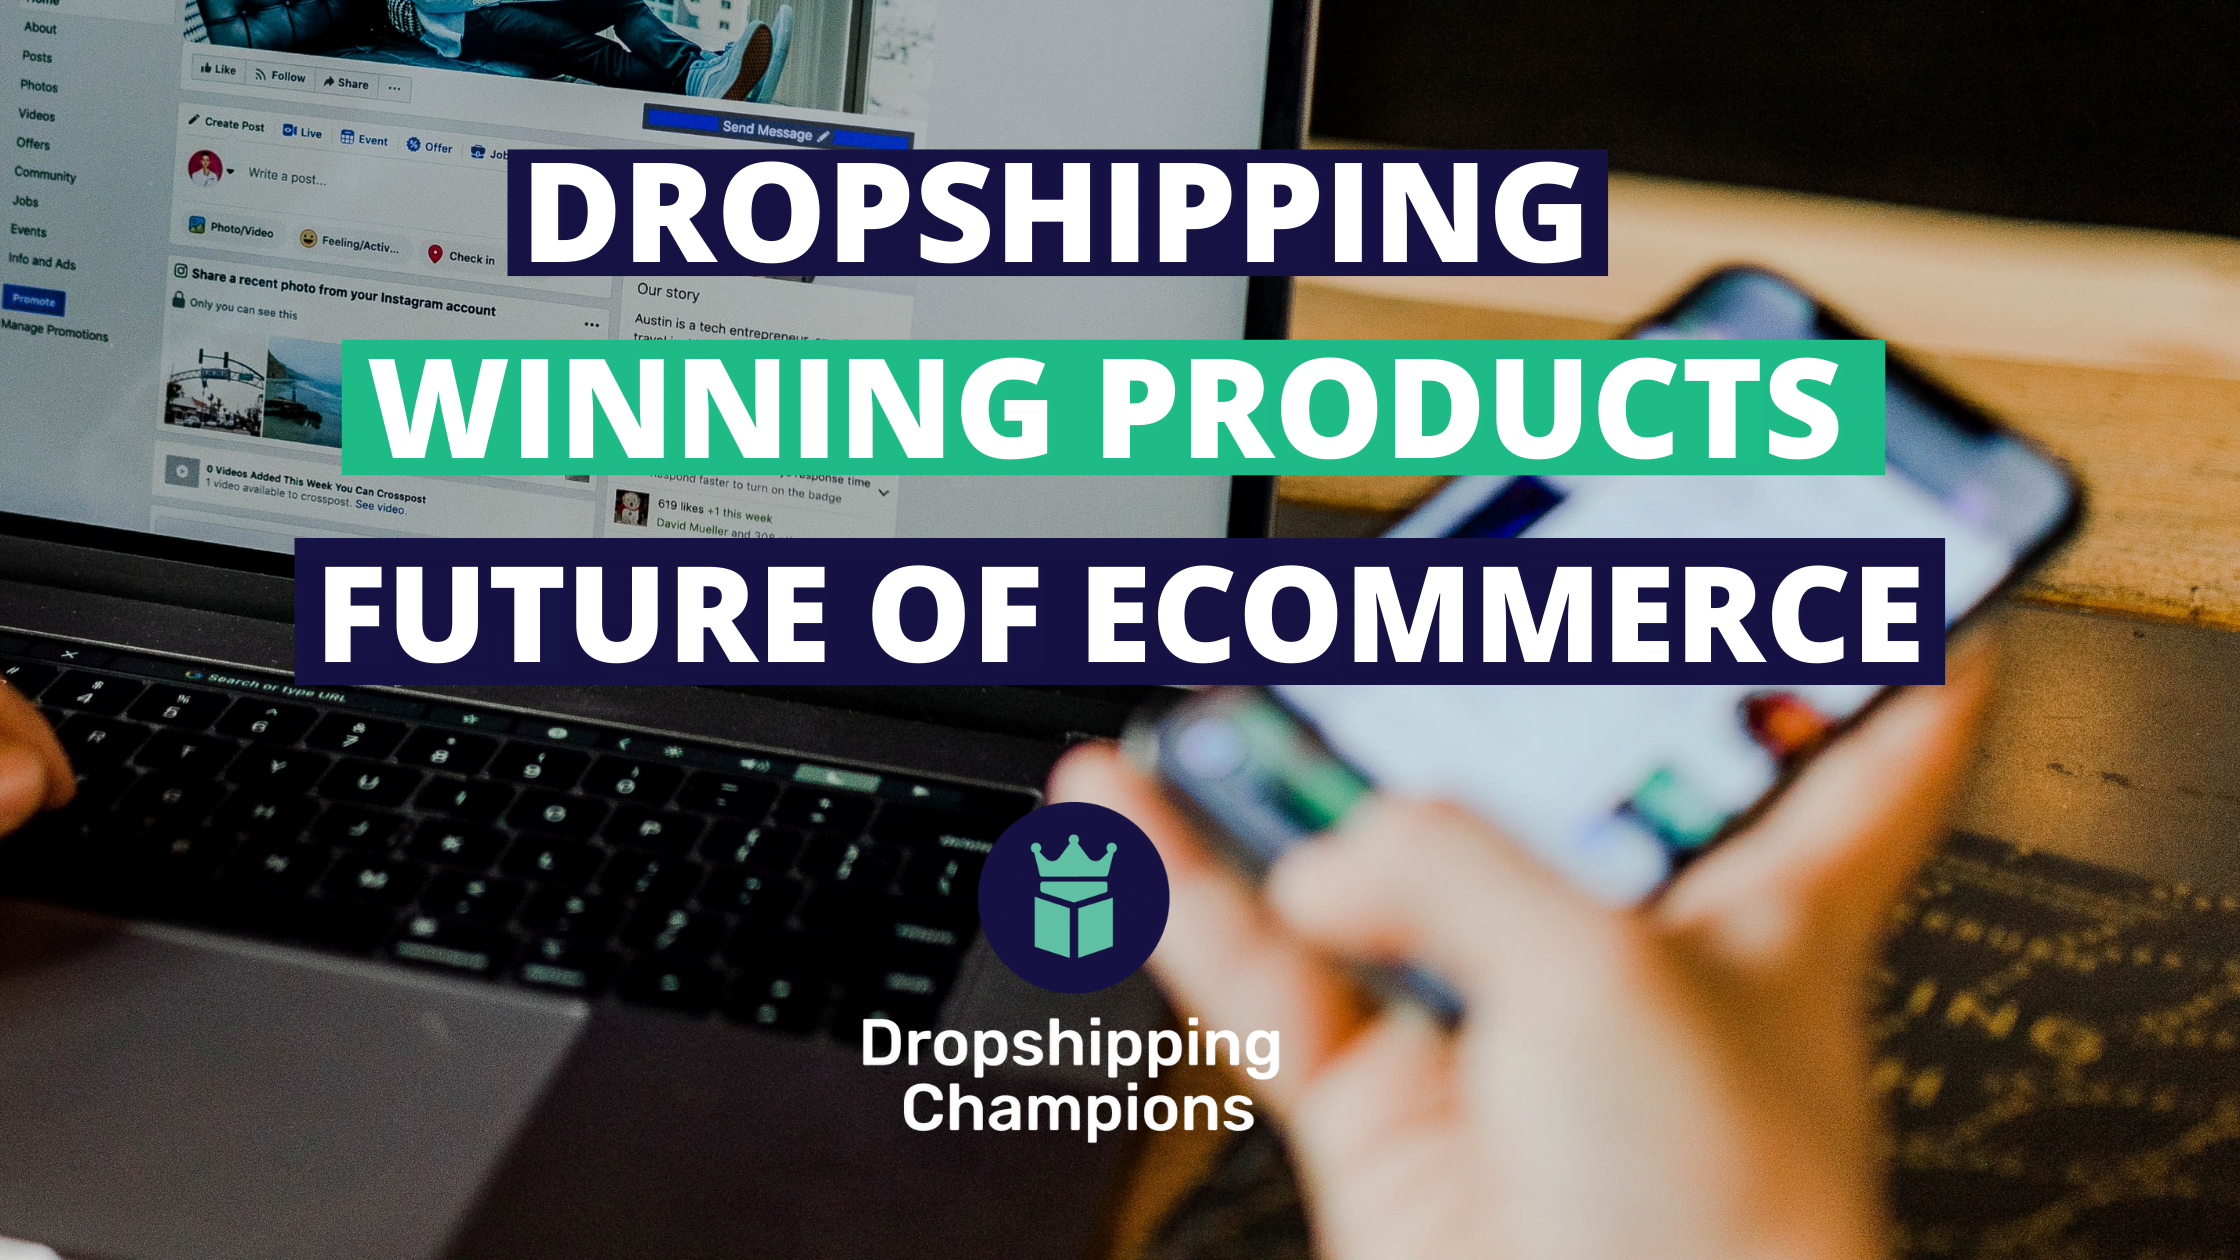 dropshipping winning products and the future of ecommerce